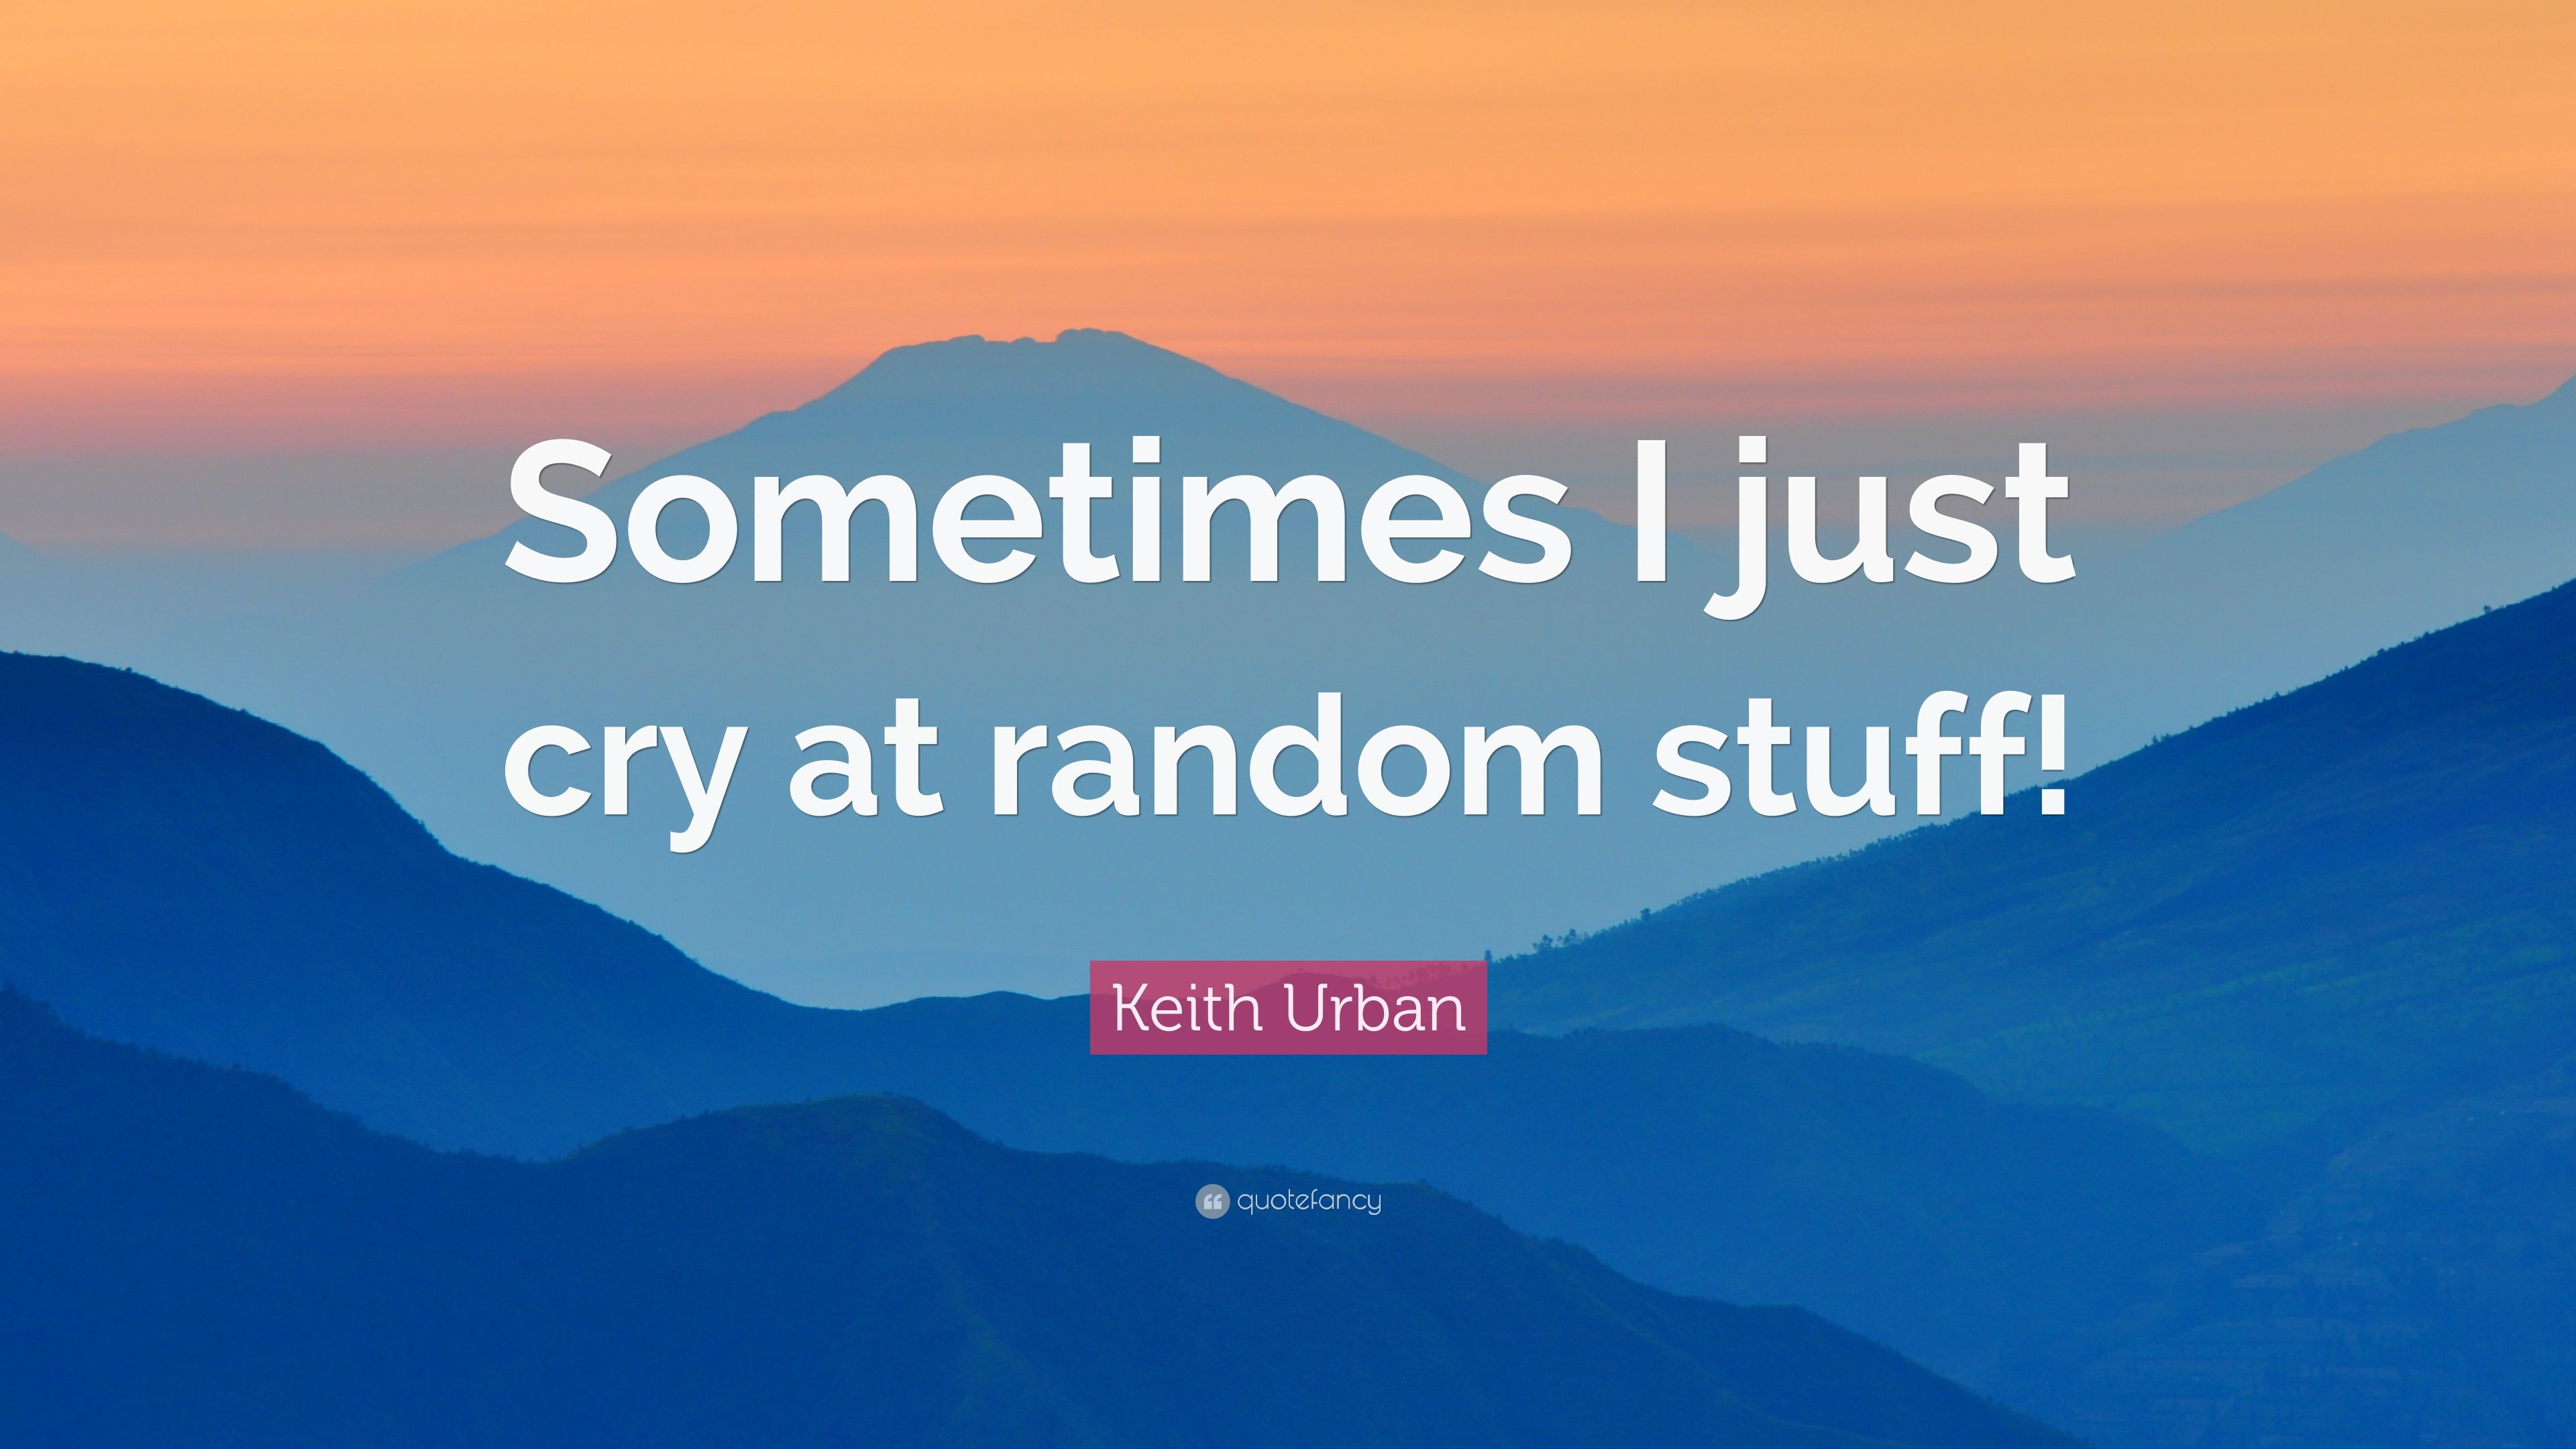 Keith Urban Quote: “Sometimes I just cry at random stuff!” 7